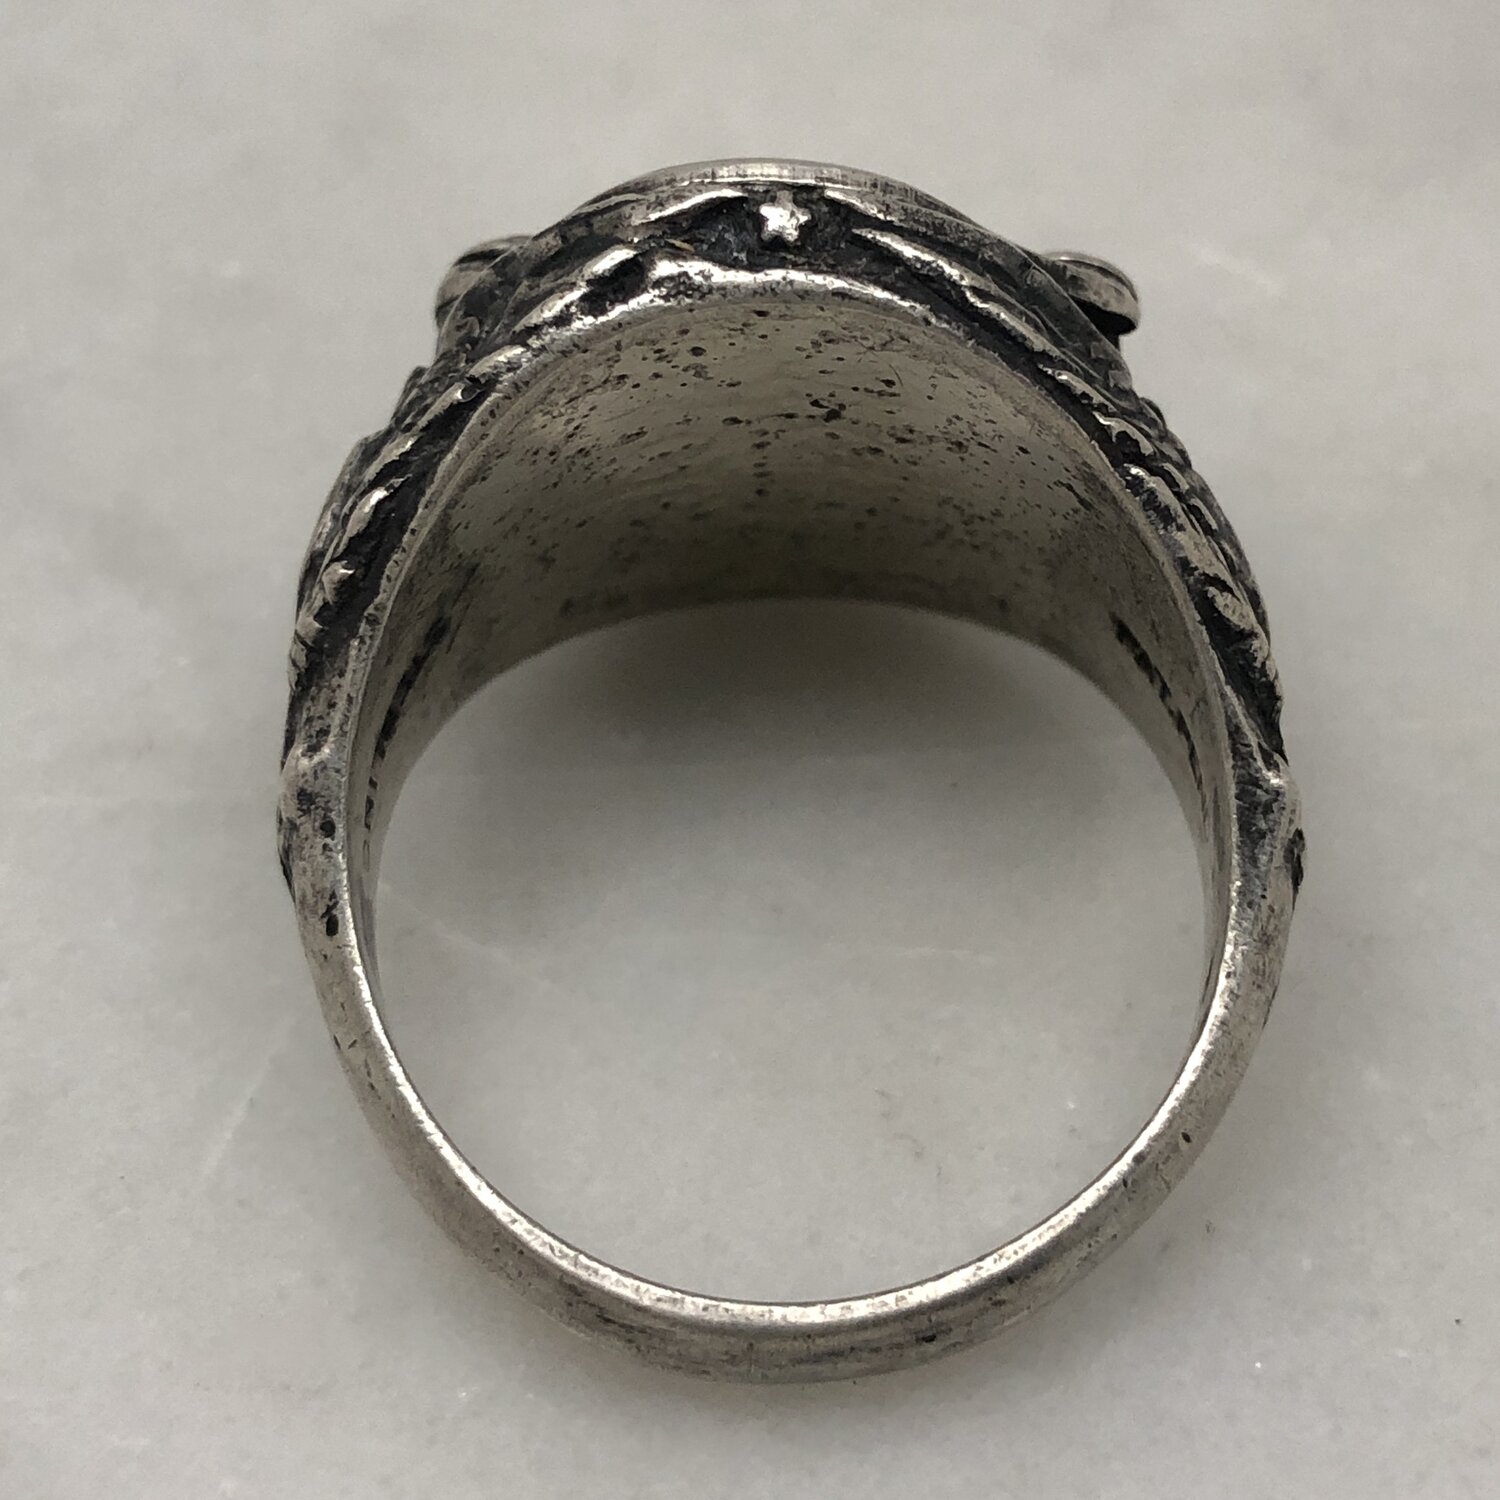 This ring with a secret compartment : r/ThriftStoreHauls